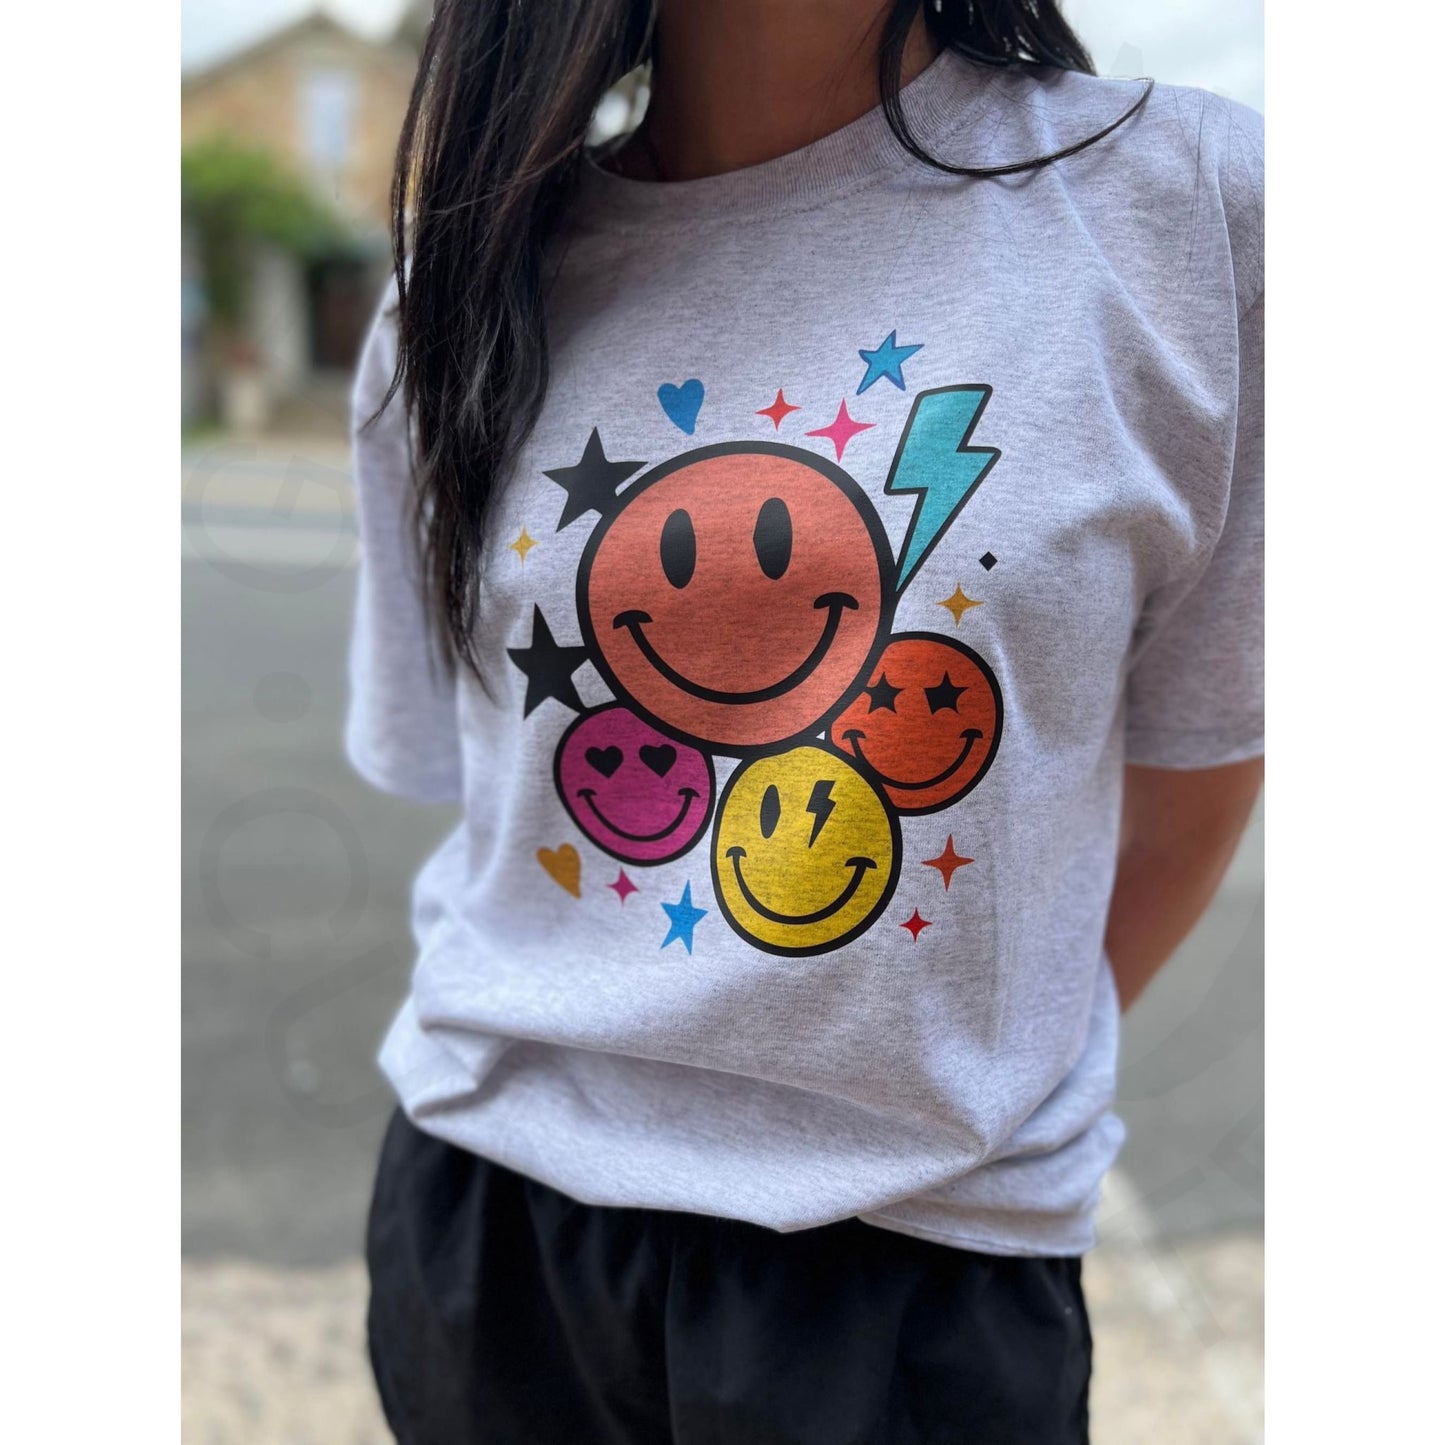 Smiley ’You Are’ Tee